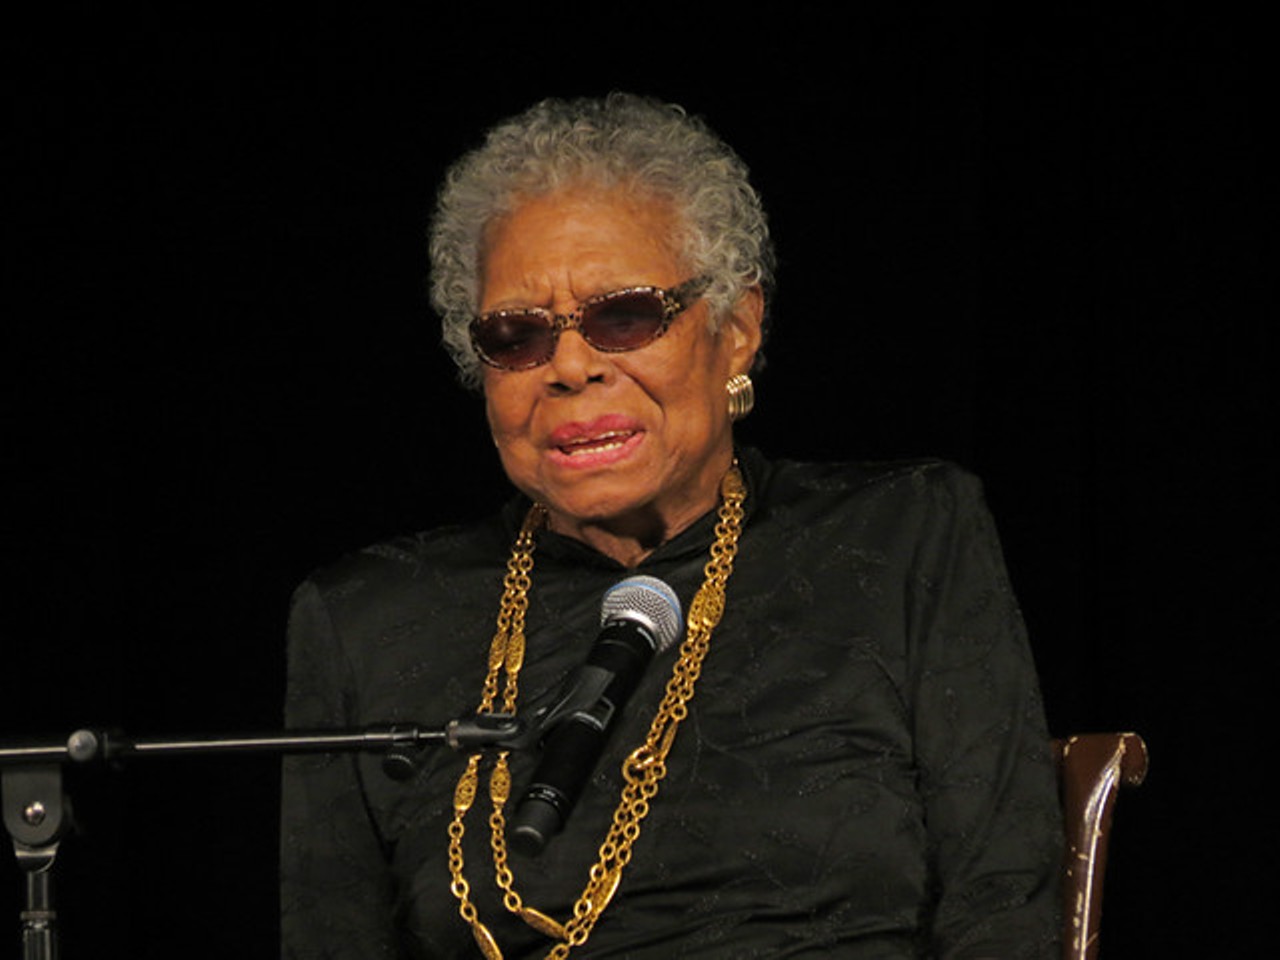 Maya Angelou
Born in St. Louis, poet and civil rights activist Maya Angelou spent much of her childhood here in the Gateway to the West.
Photo credit: York College of PA / Flickr